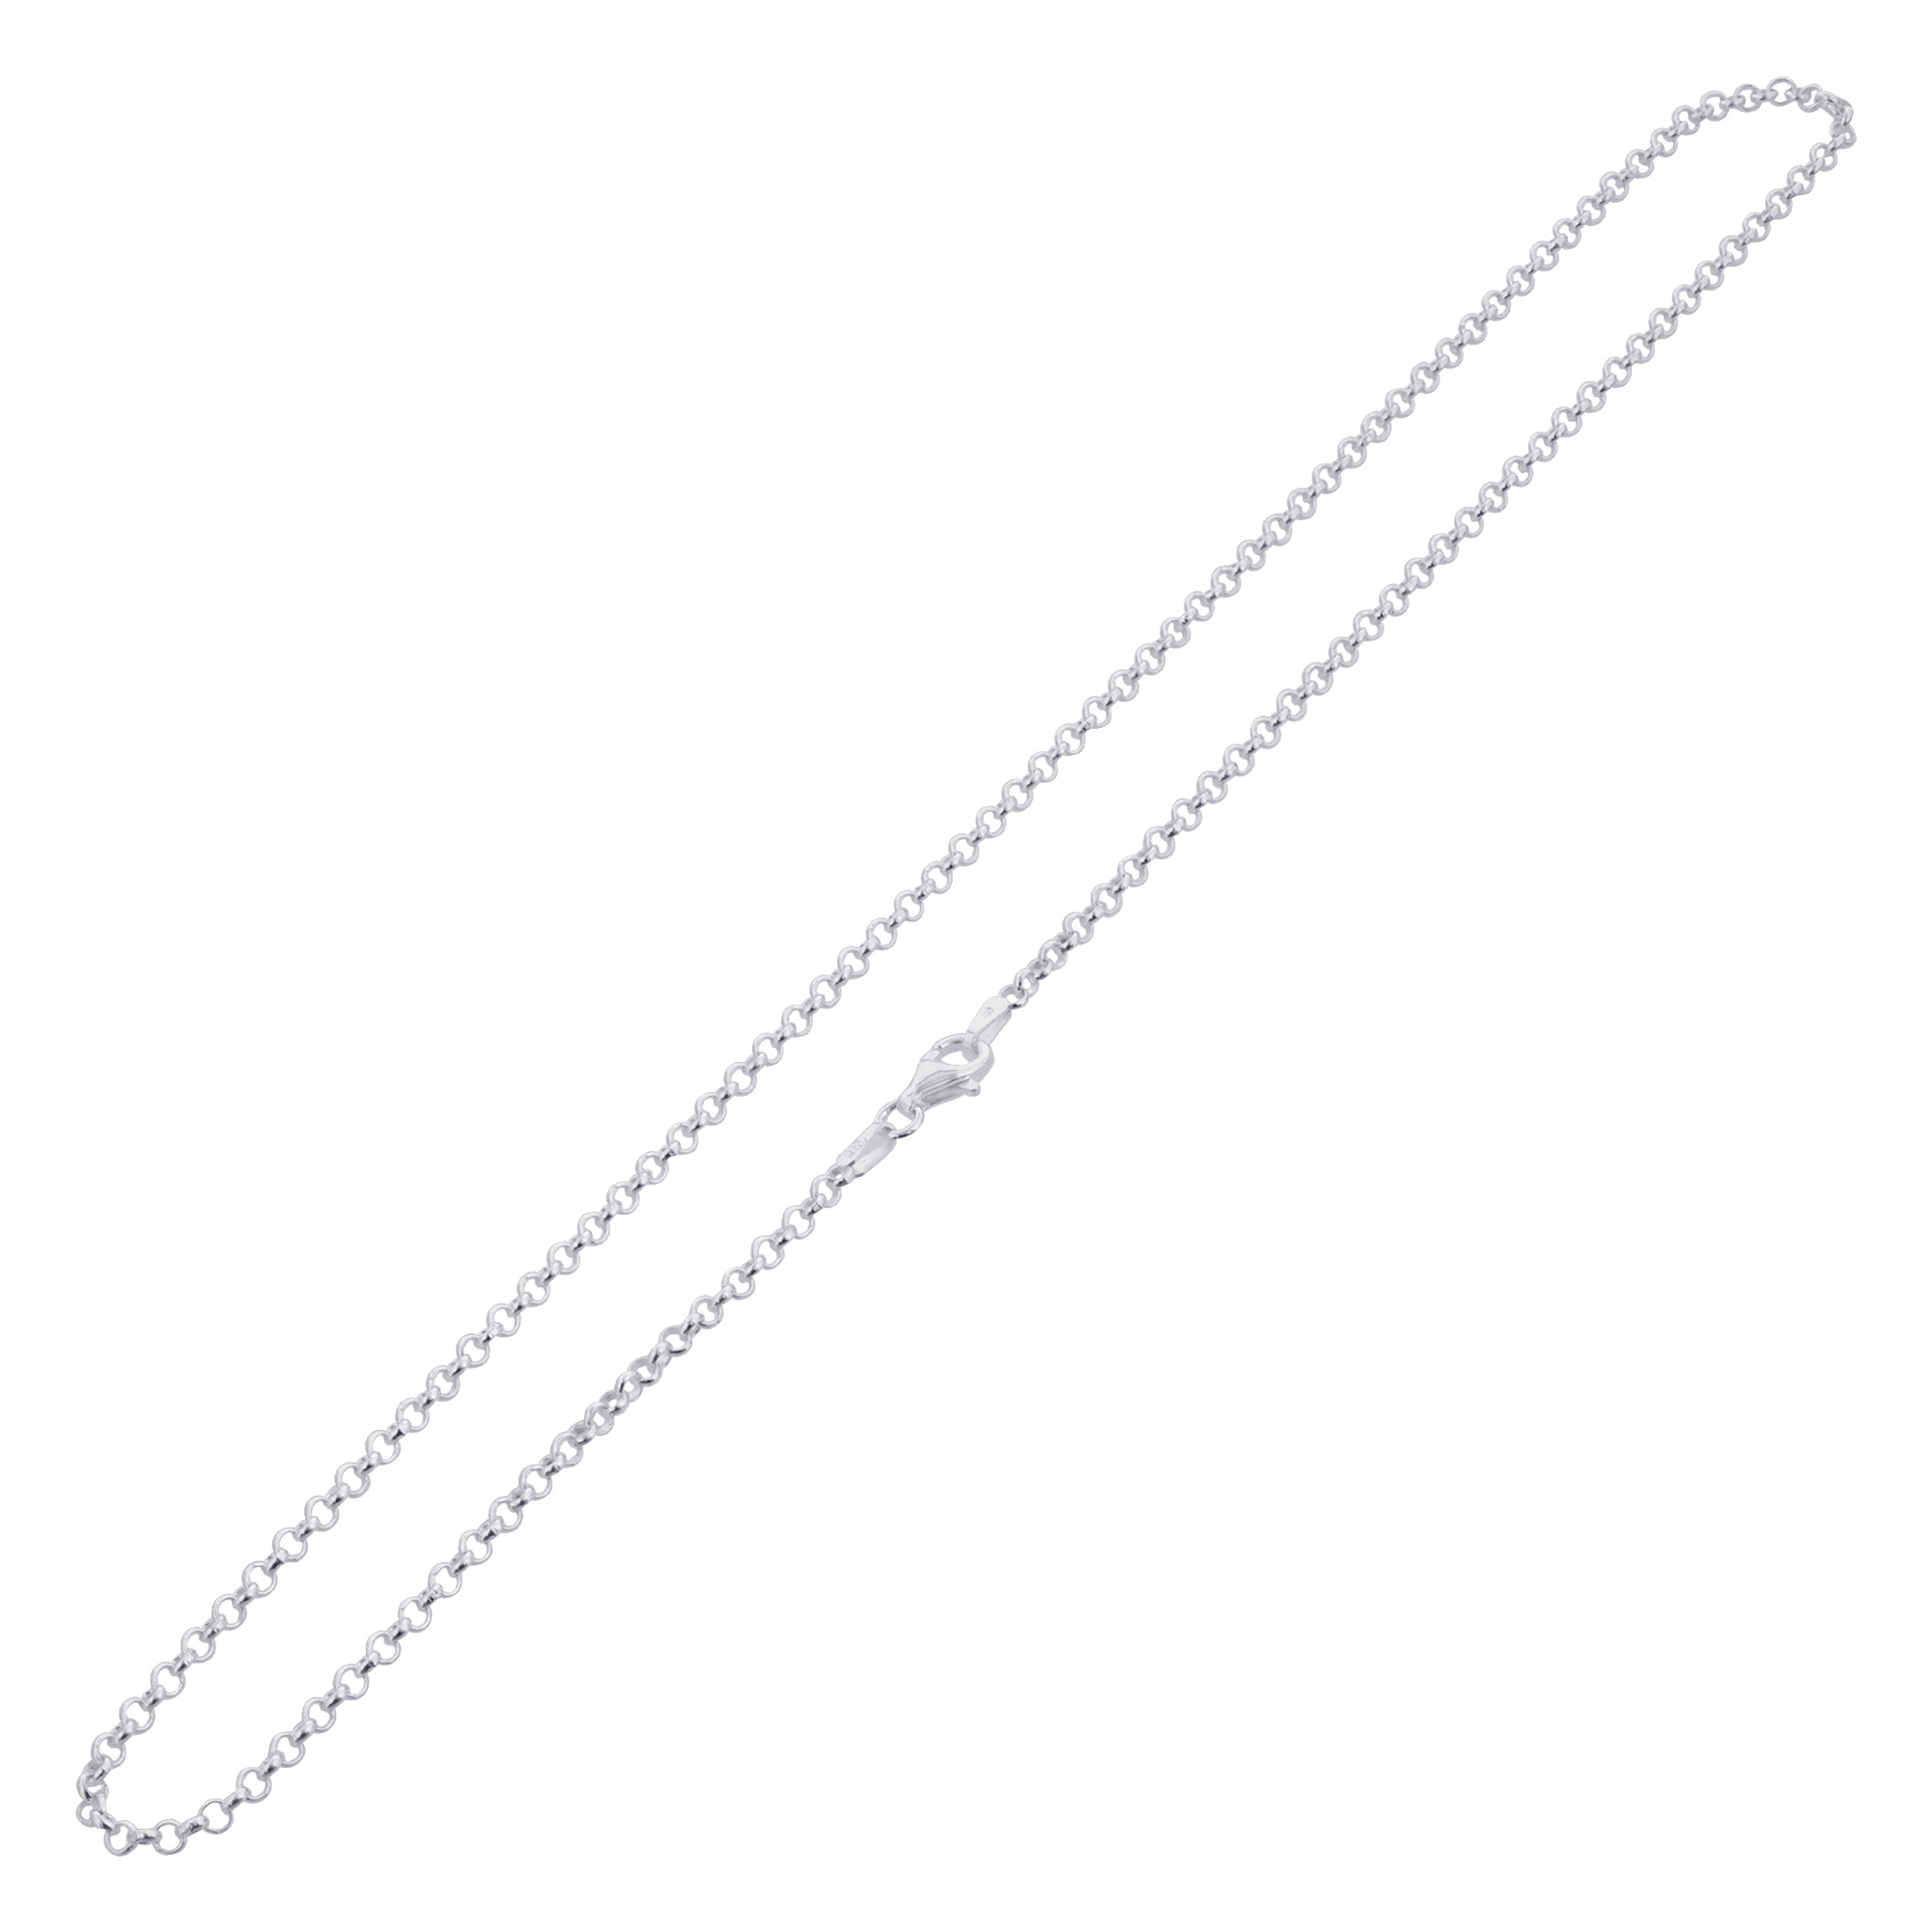 Gem Avenue Sterling Silver 2.5mm Rolo Chain Necklace with Lobster Clasp